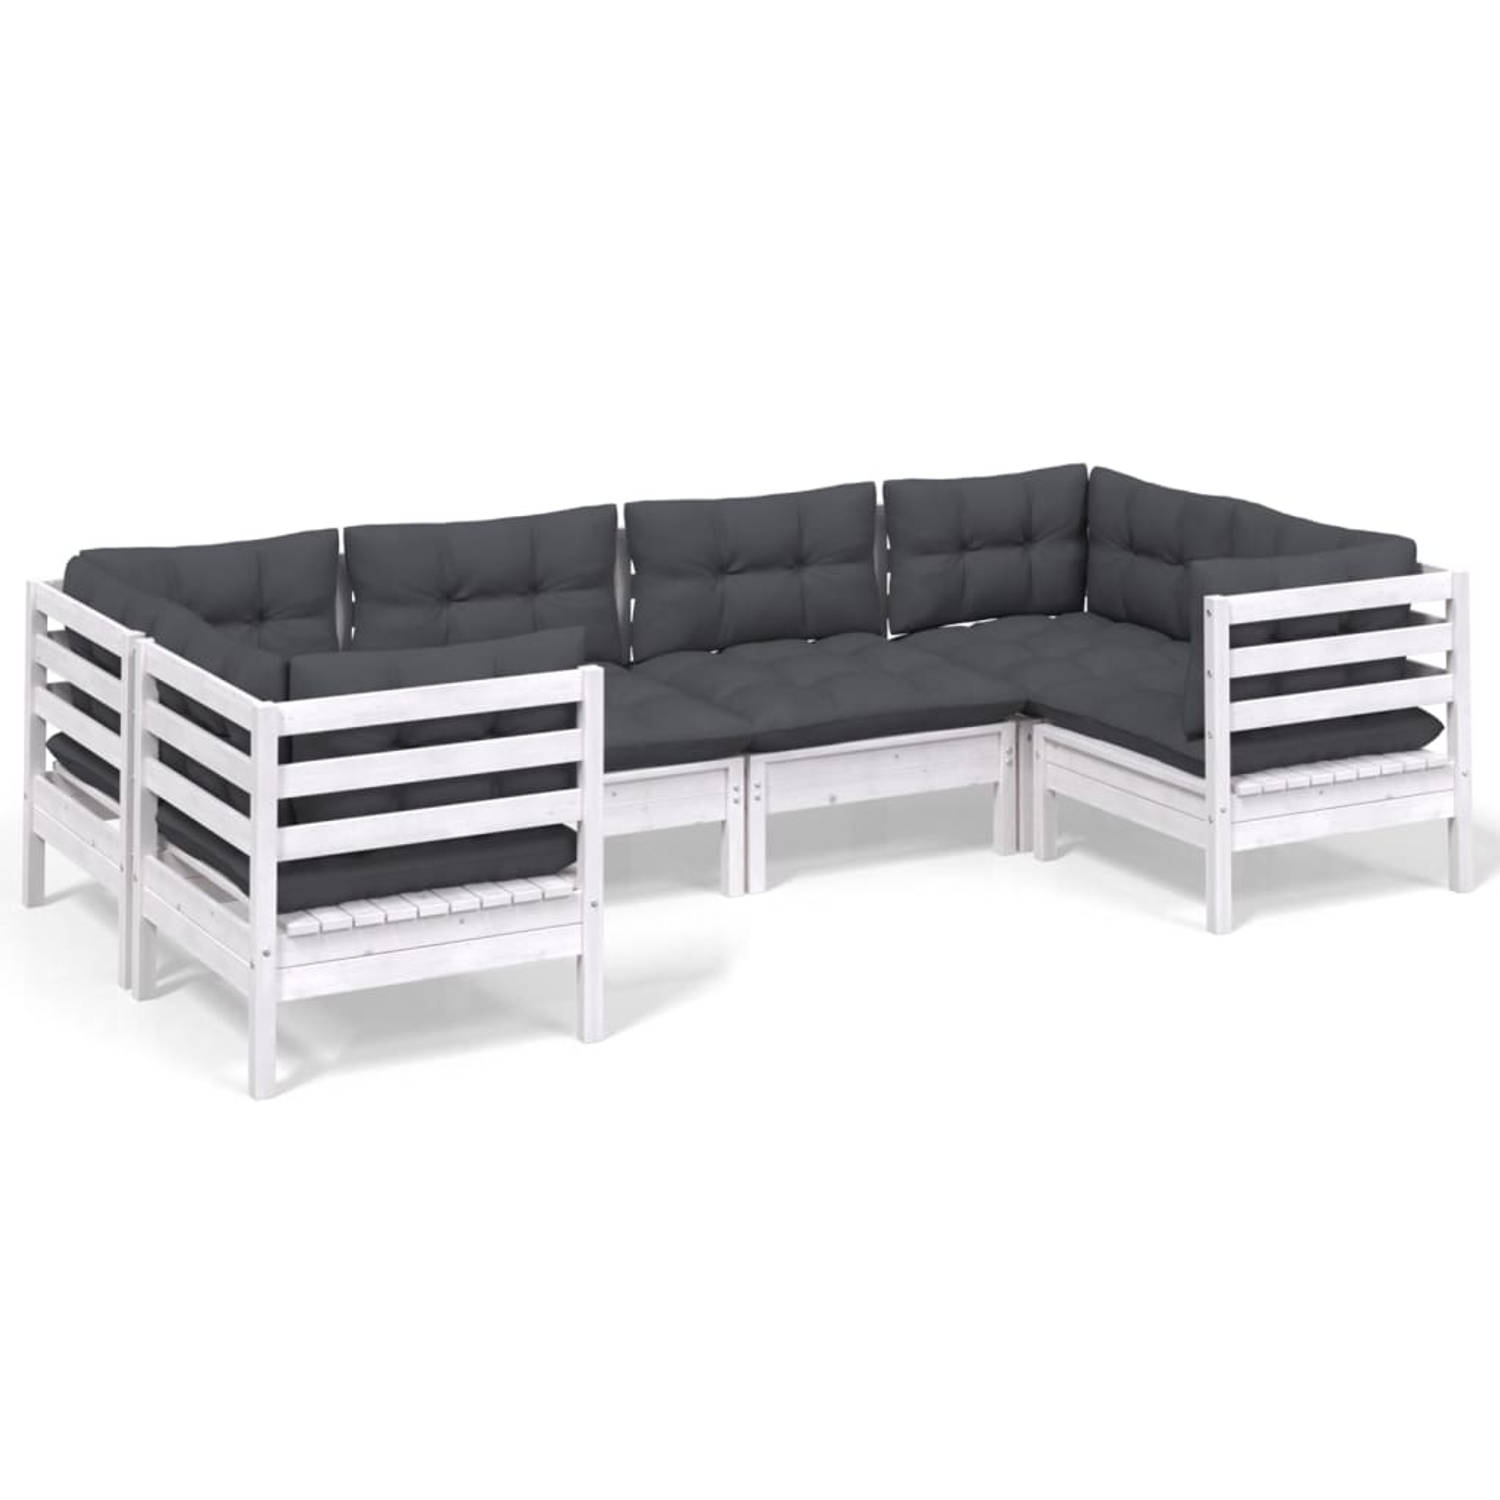 The Living Store Loungeset - Grenenhout - Modulair - Wit - Antraciet - 63.5 x 63.5 x 62.5 cm